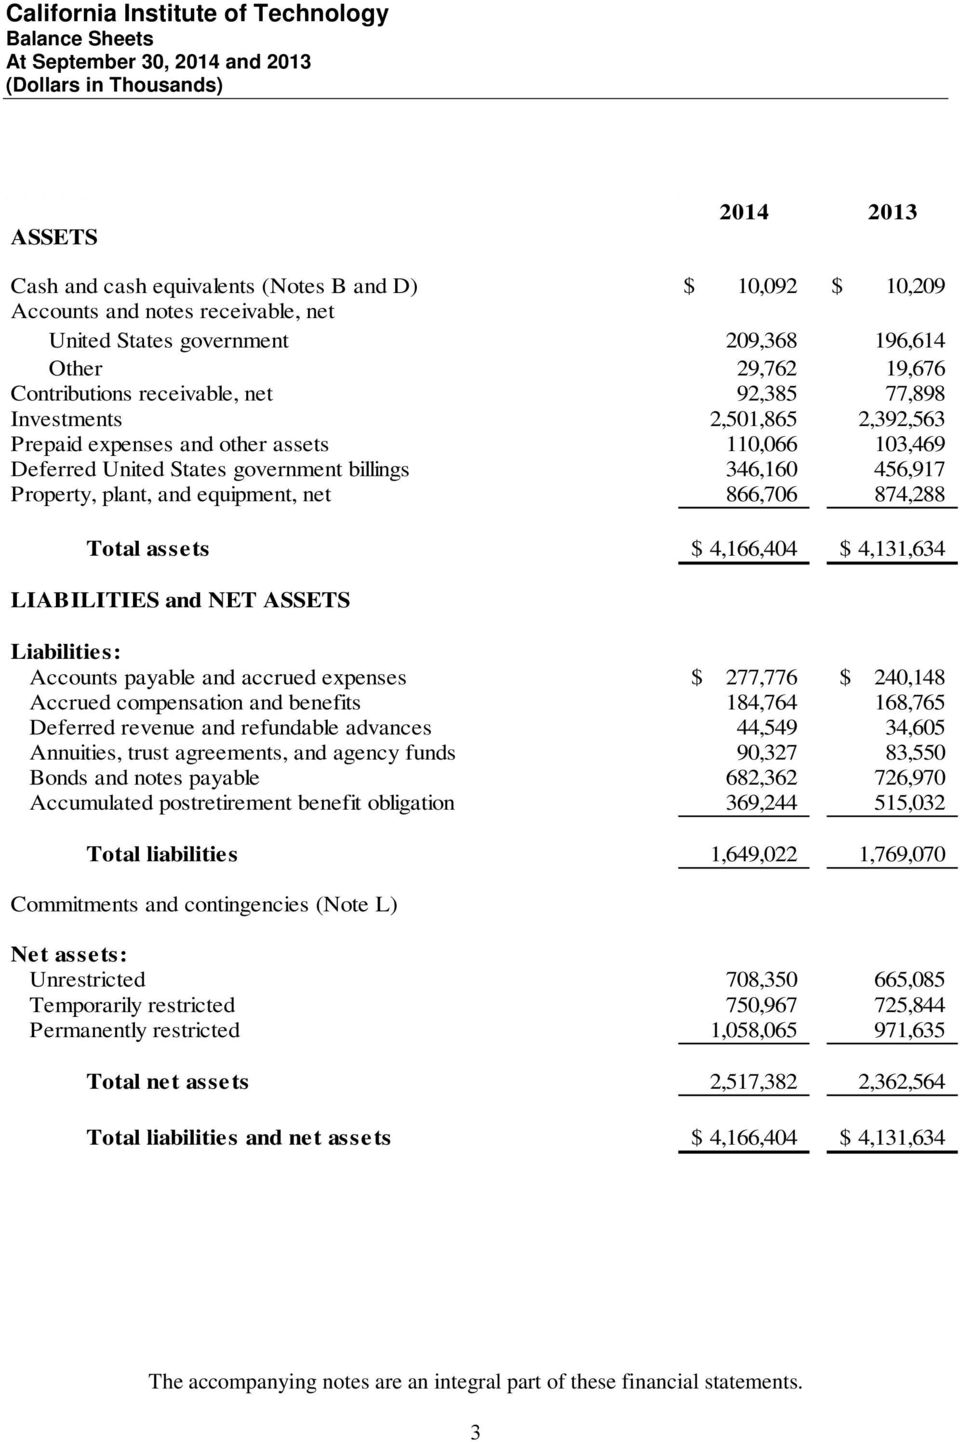 equipment, net 866,706 874,288 Total assets $ 4,166,404 $ 4,131,634 LIABILITIES and NET ASSETS Liabilities: Accounts payable and accrued expenses $ 277,776 $ 240,148 Accrued compensation and benefits